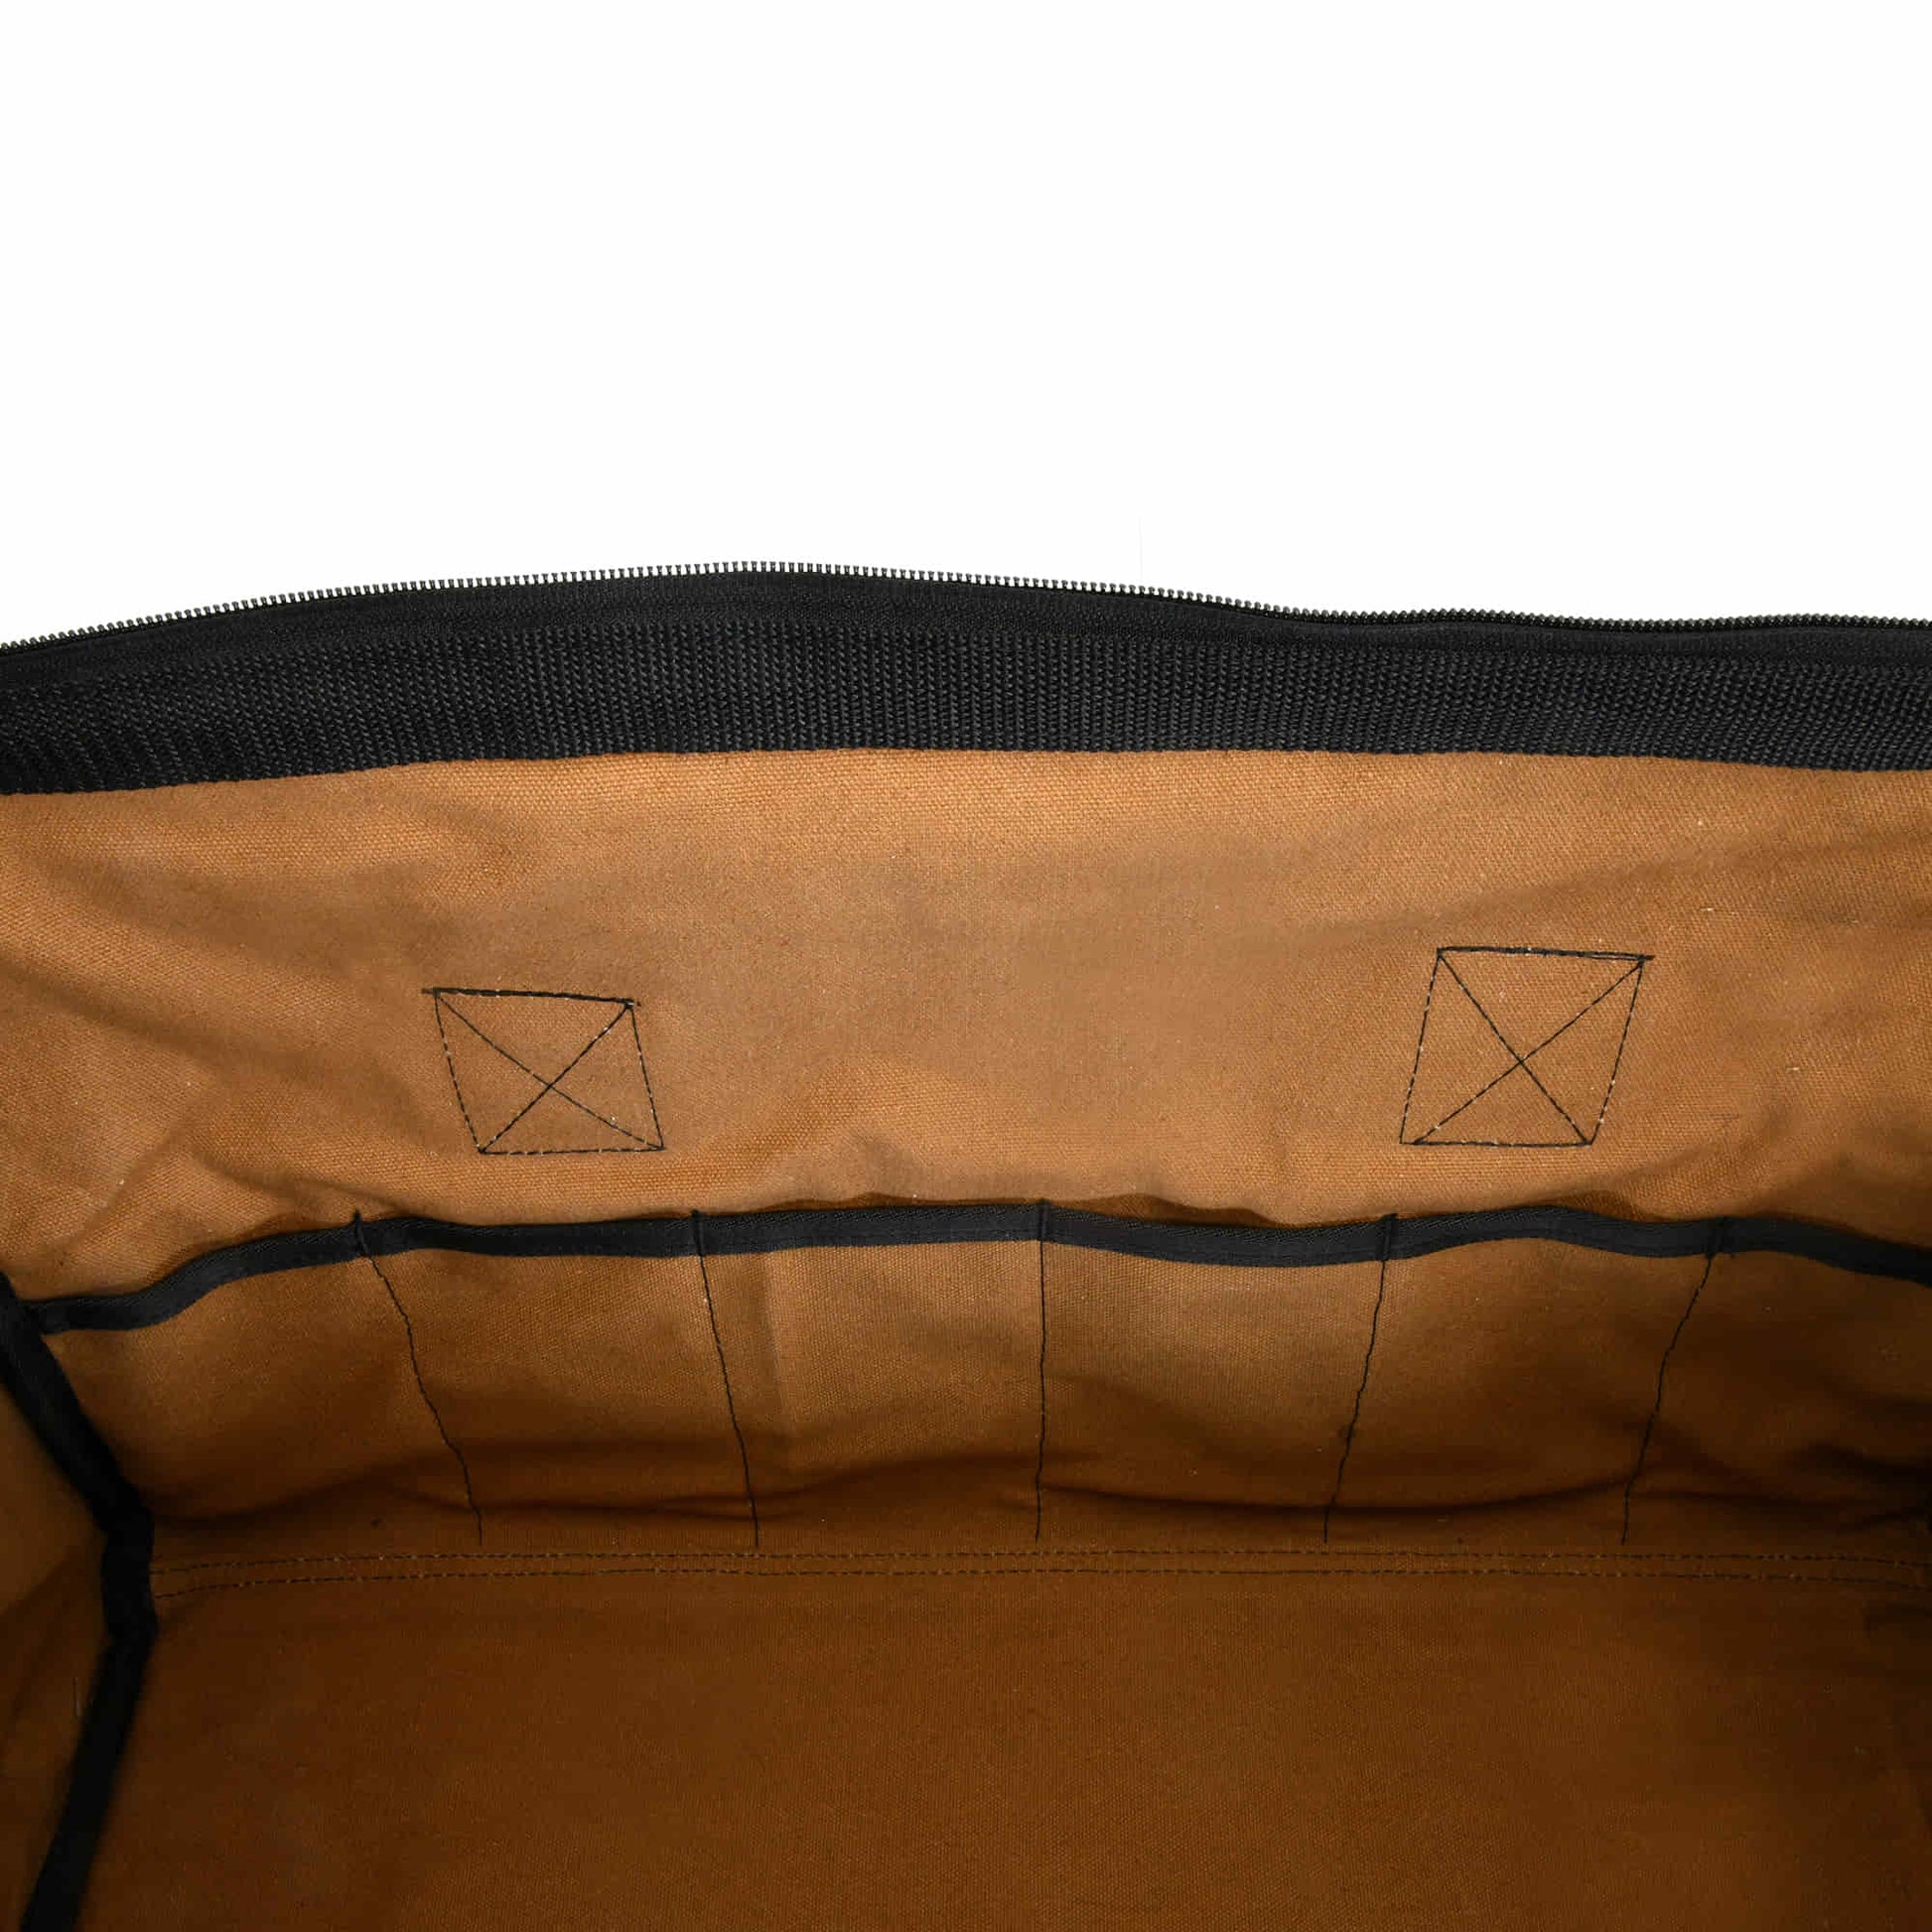 Style n Craft 97012 - 25 Pocket 20 Inch Wide Mouth Tool Bag in Brown Waterproof Canvas with Black Binding - Internal View Showing the Internal Pockets 